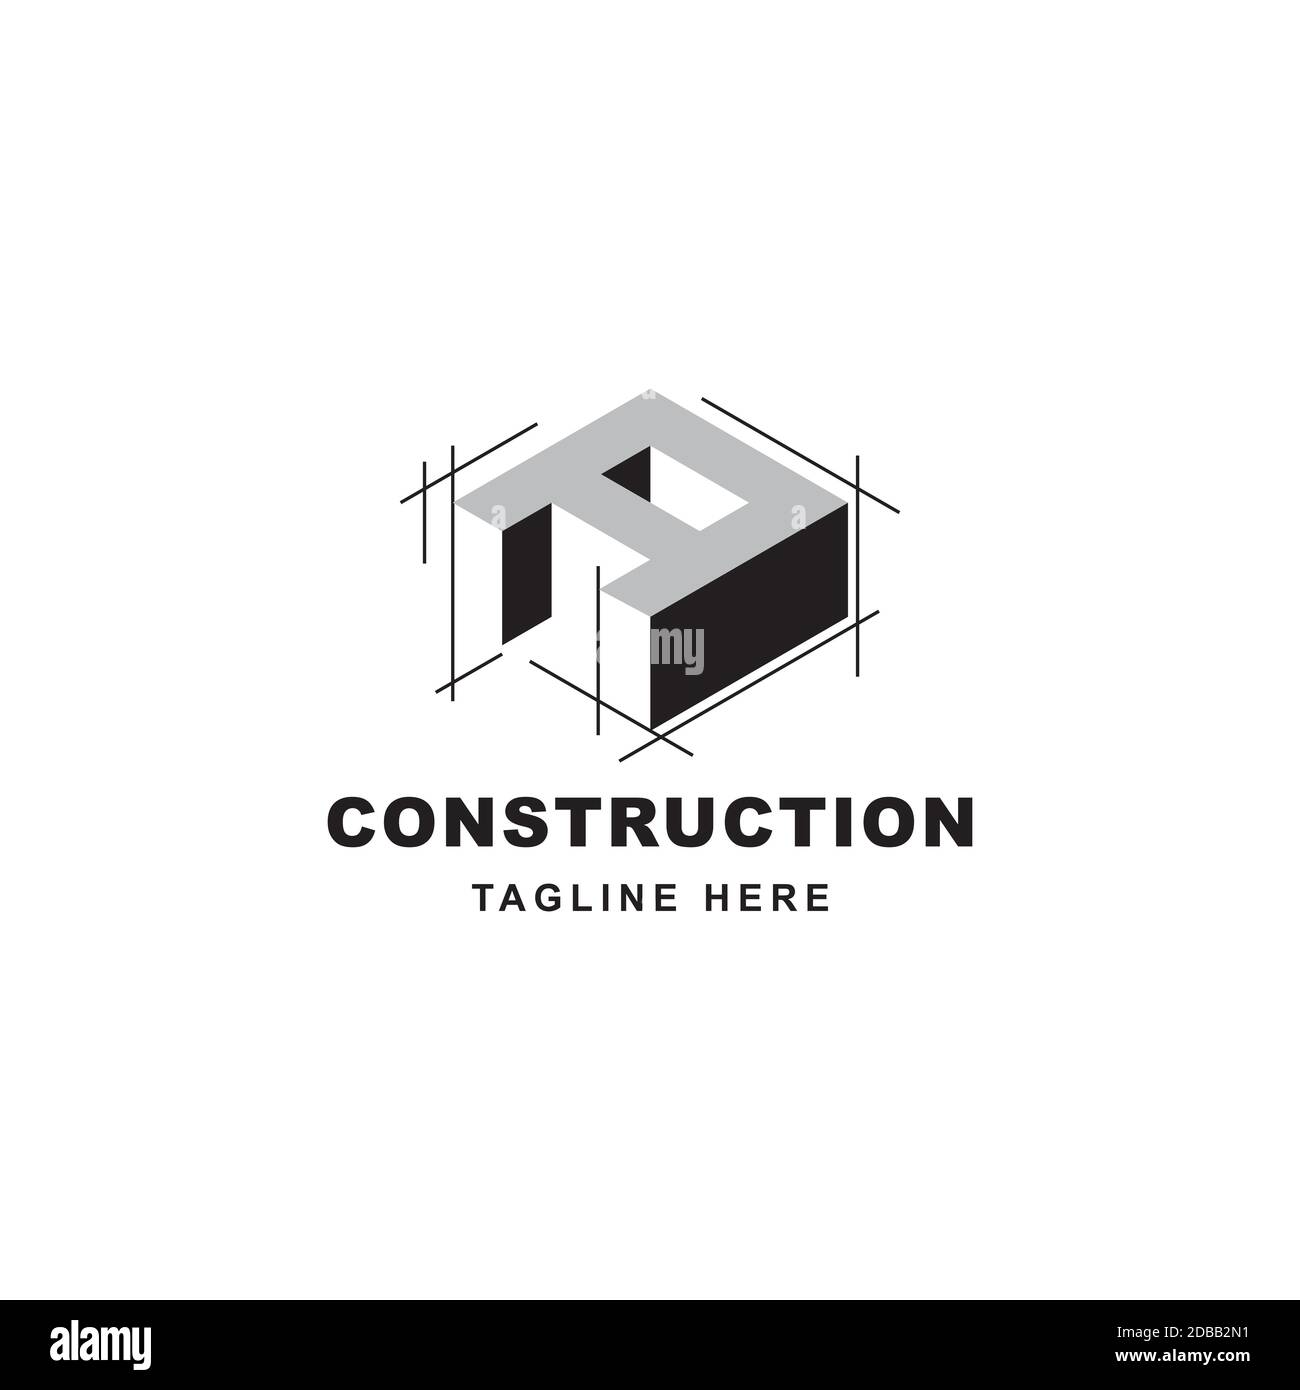 Construction logo design with letter A shape icon. Initial letter A on building symbol Stock Vector